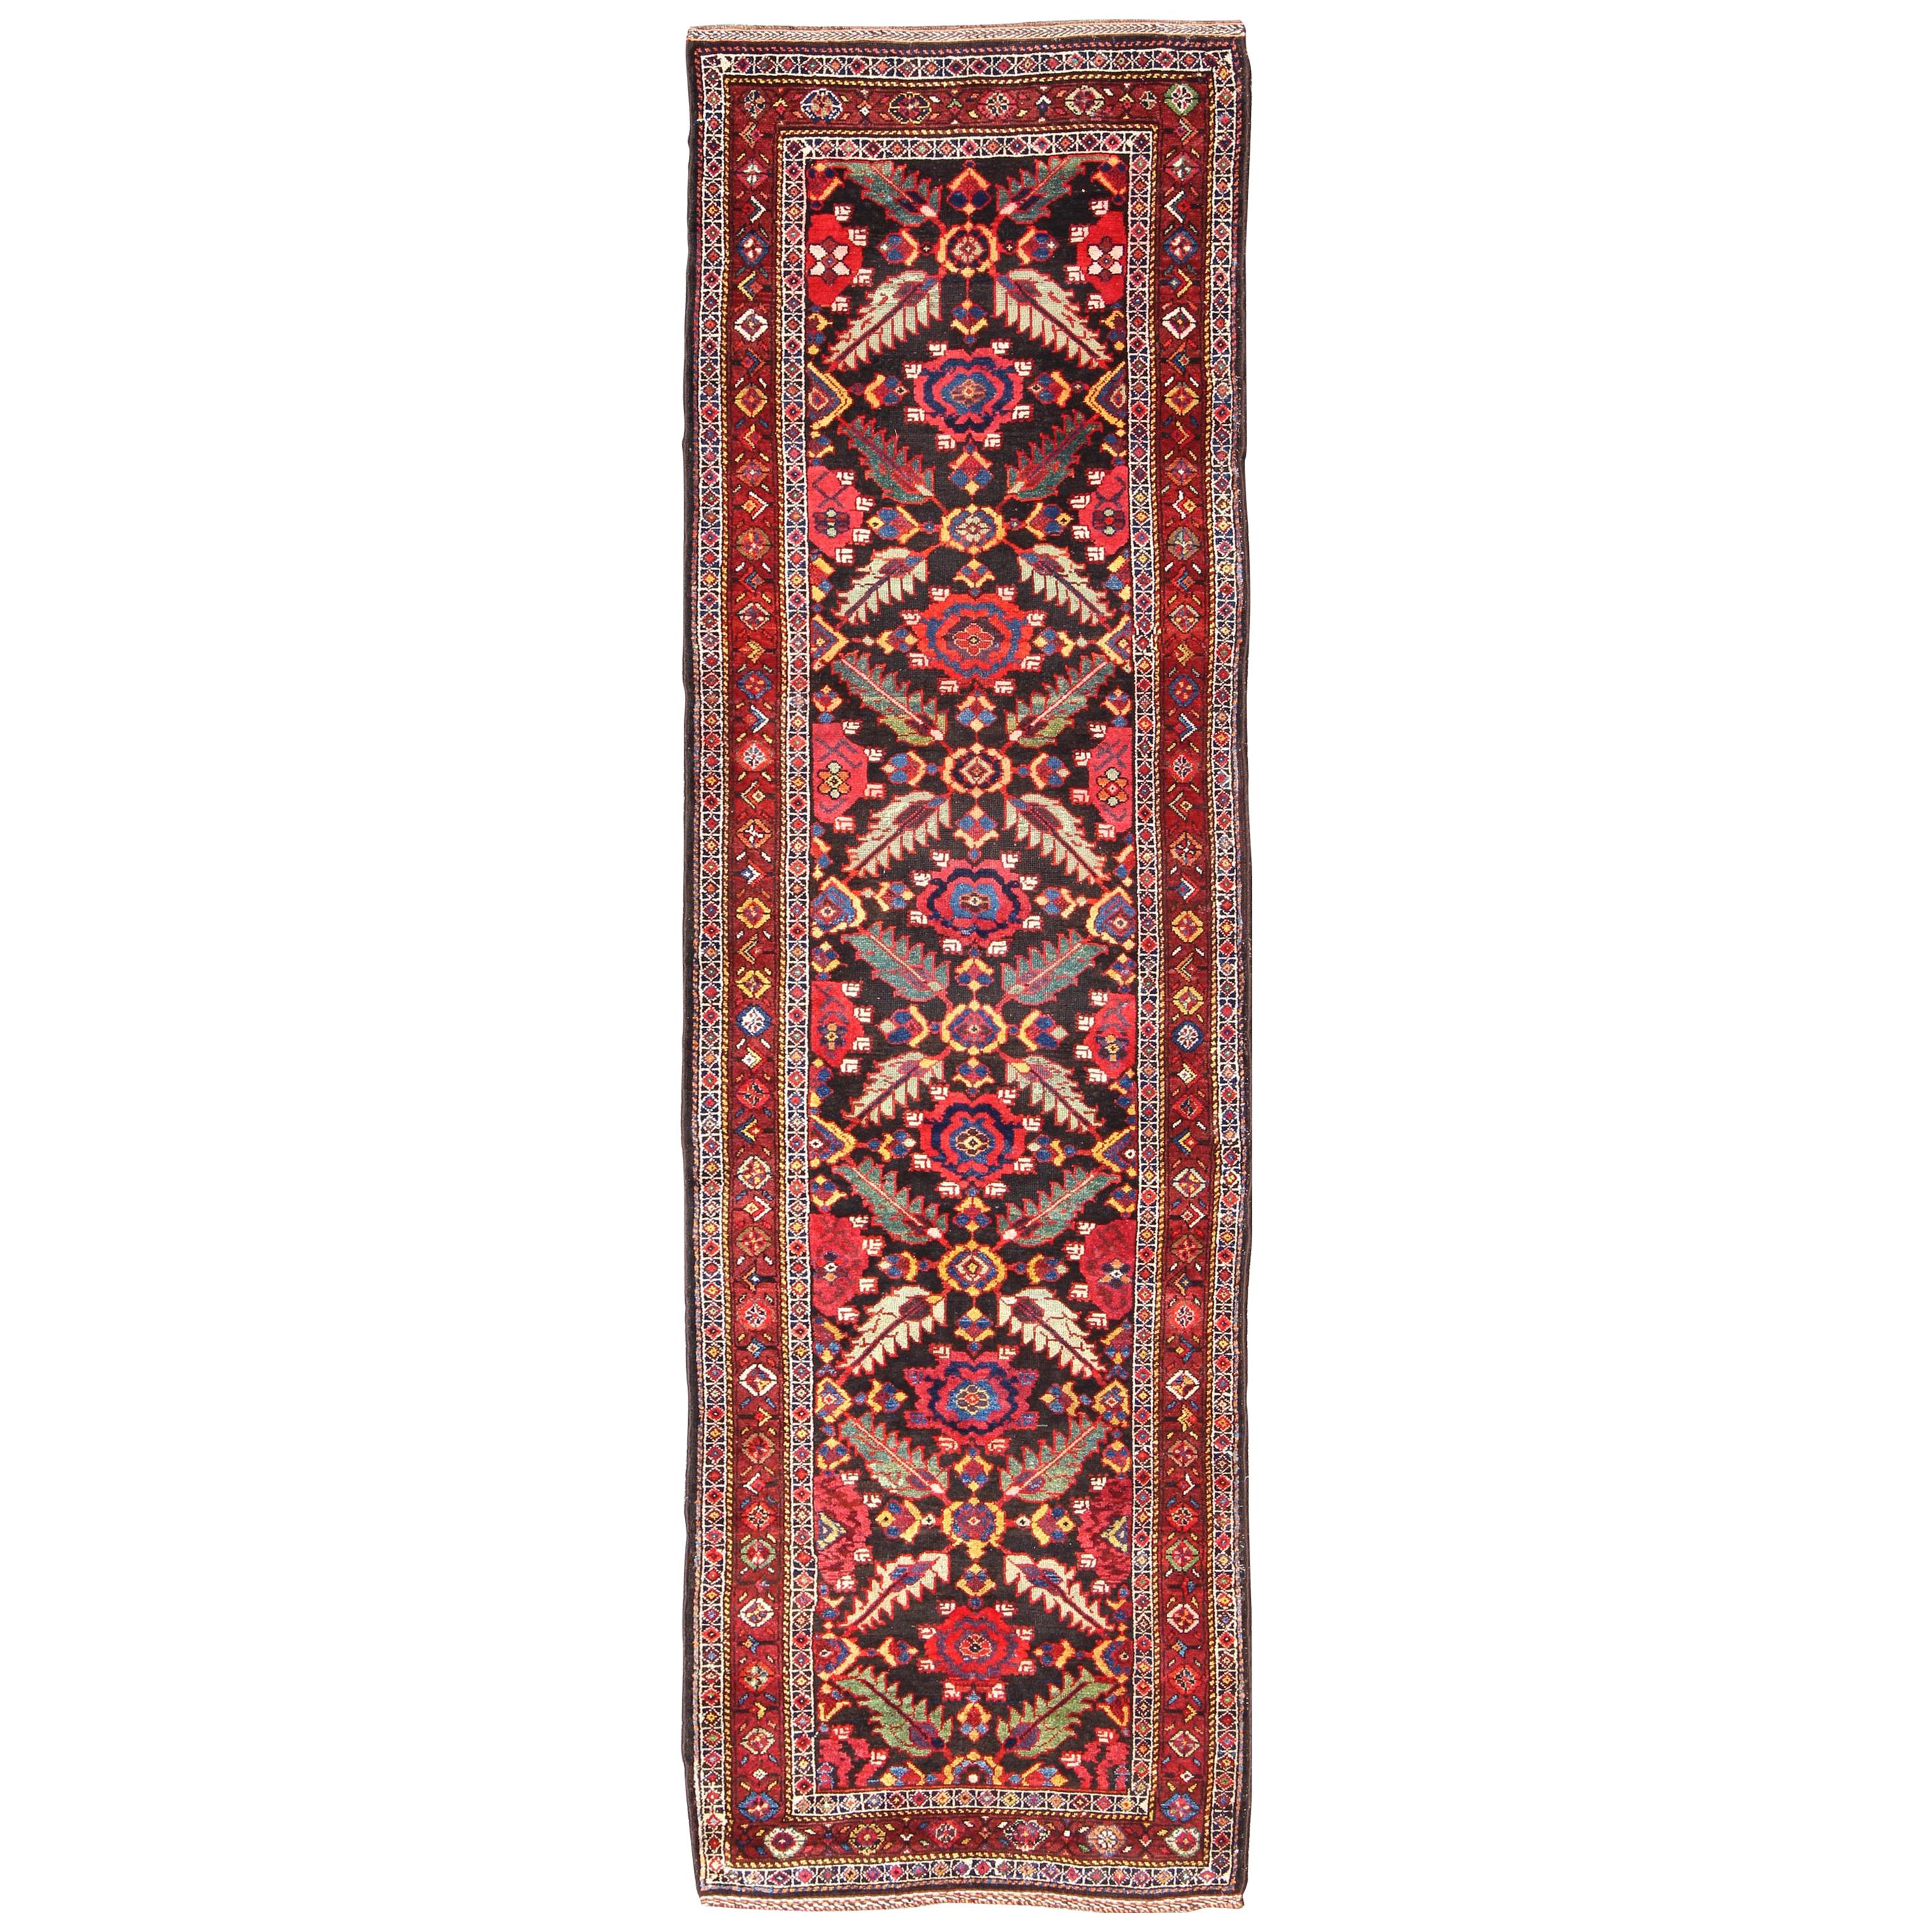 Colorful Jewel-Toned Antique Caucasian Karabagh Runner with Tribal Design